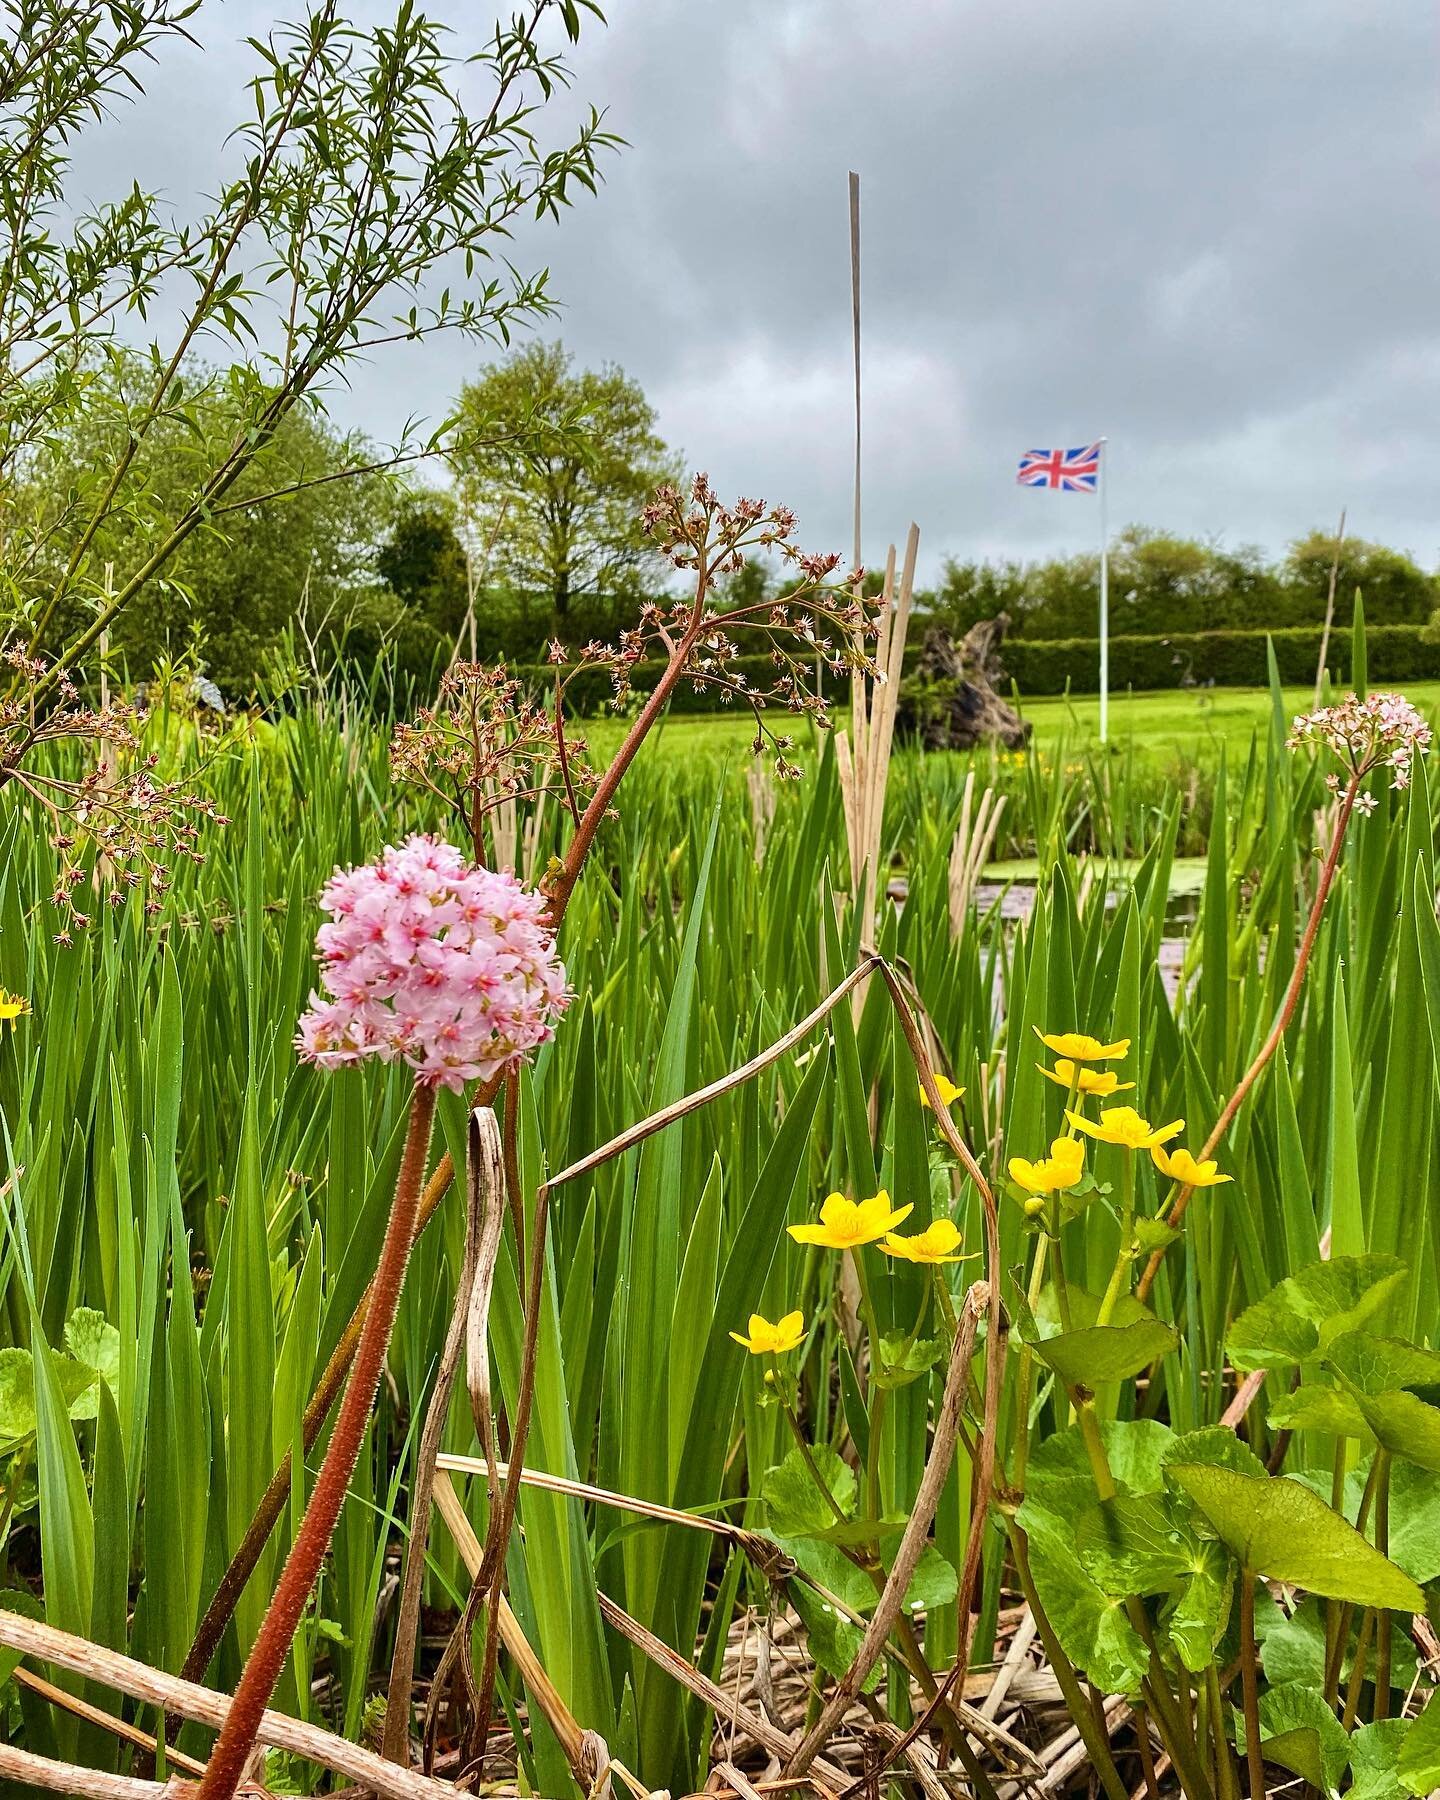 Some of the blooms around the Upper Parsonage Farm pond 🌼🌸 and our Coronation flag still flying high! 🇬🇧

Wishing our campers a wonderful stay this weekend! 🏕️

#upperparsonagecampsite #upperparsonagefarm #upperparsonagefarmcampsite #campsite #e